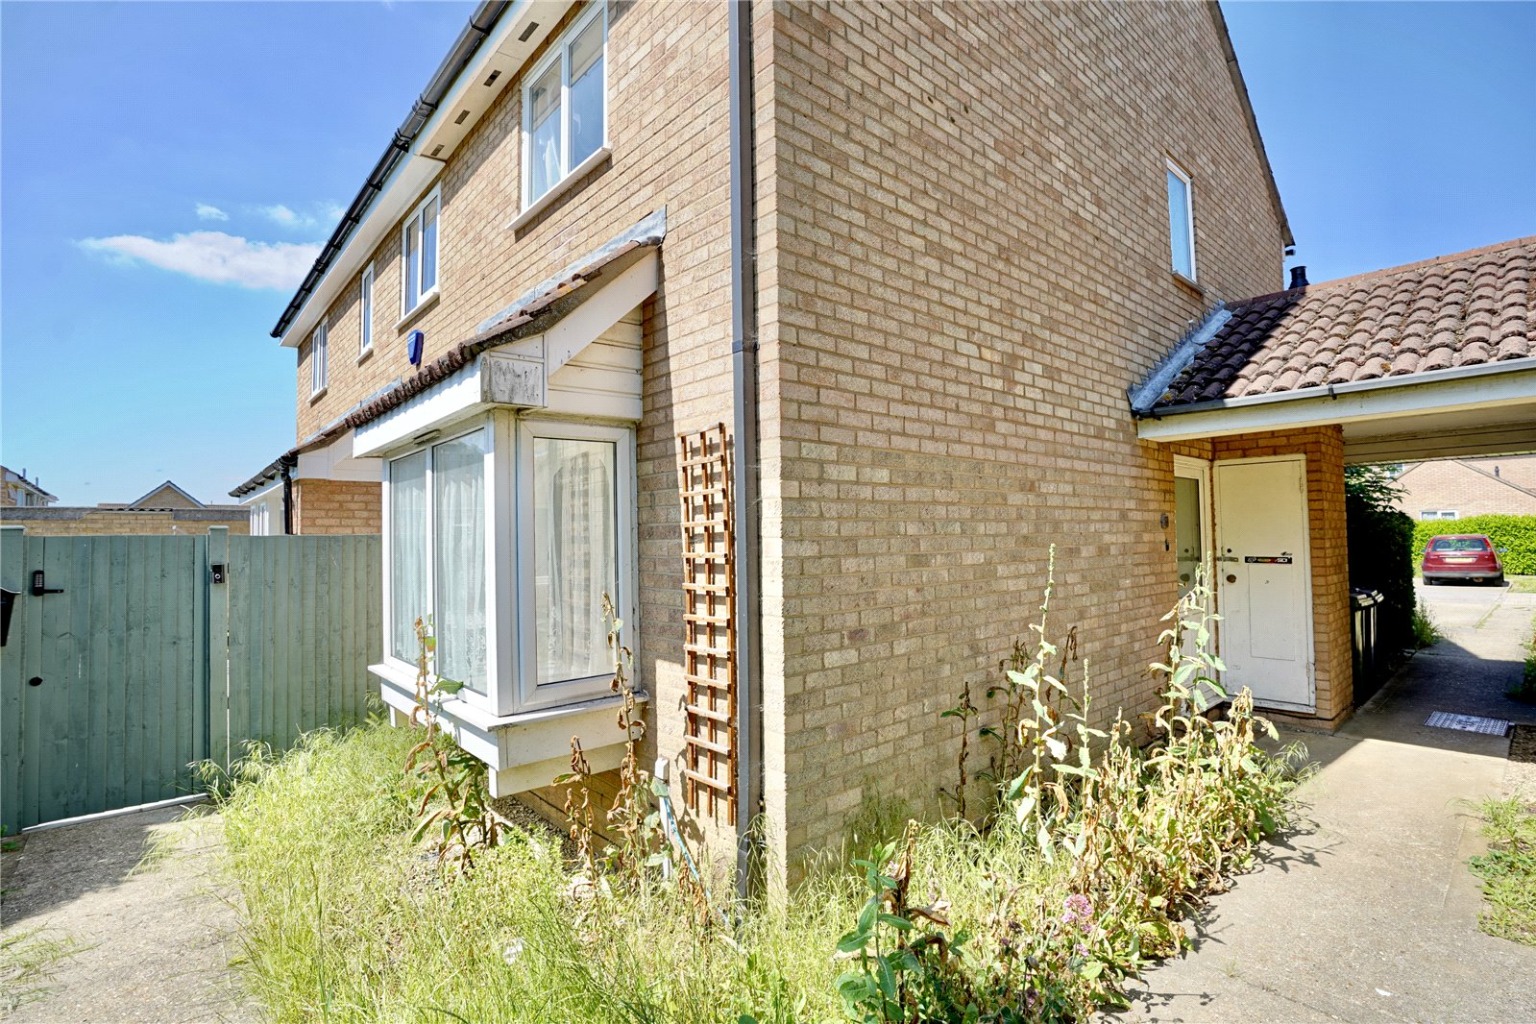 2 bed end of terrace house for sale in Roe Green, St. Neots - Property Image 1